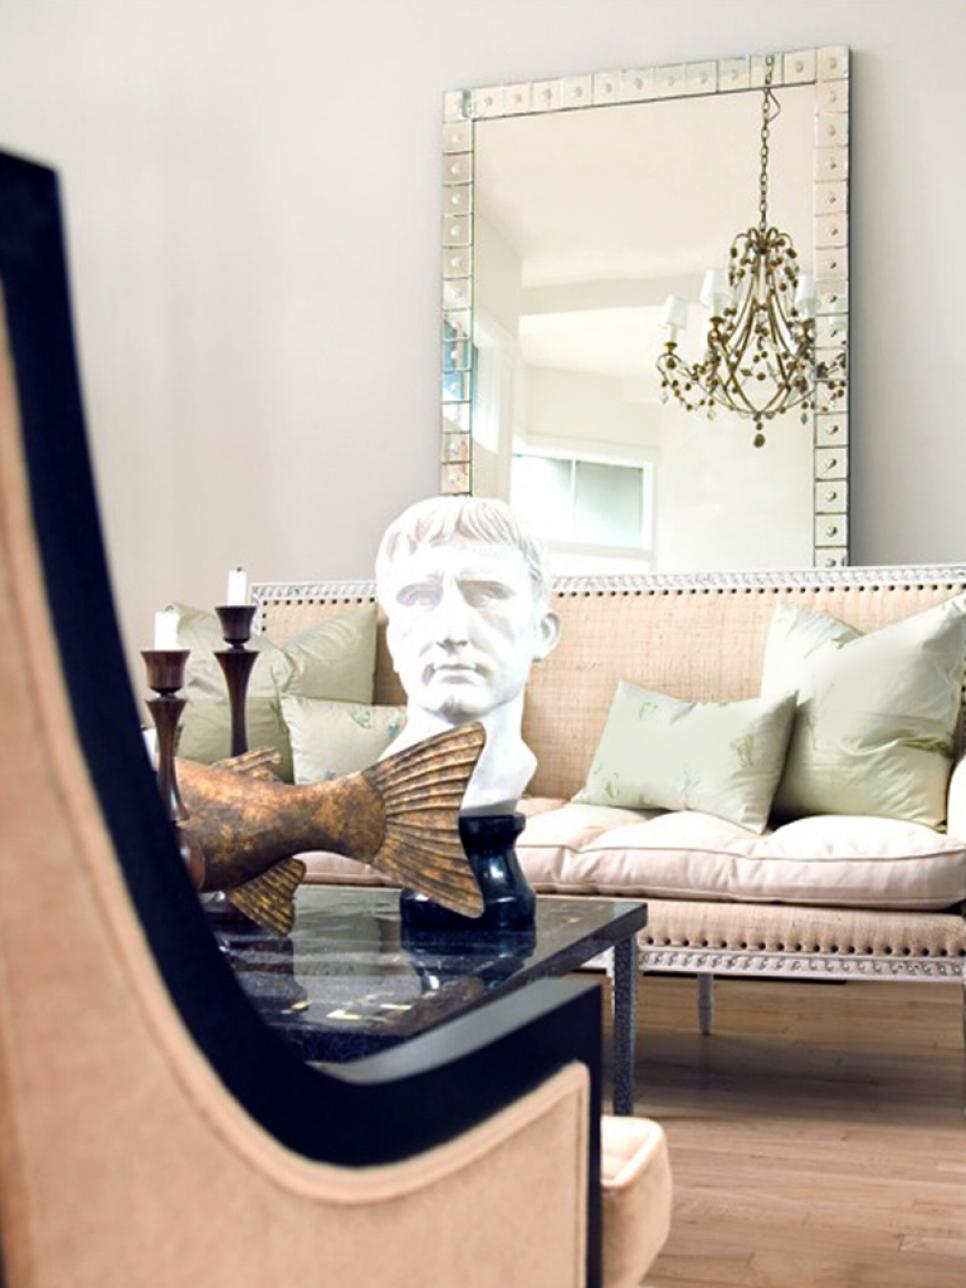 Neutral Living Room With Oversize Mirror and Sculptures